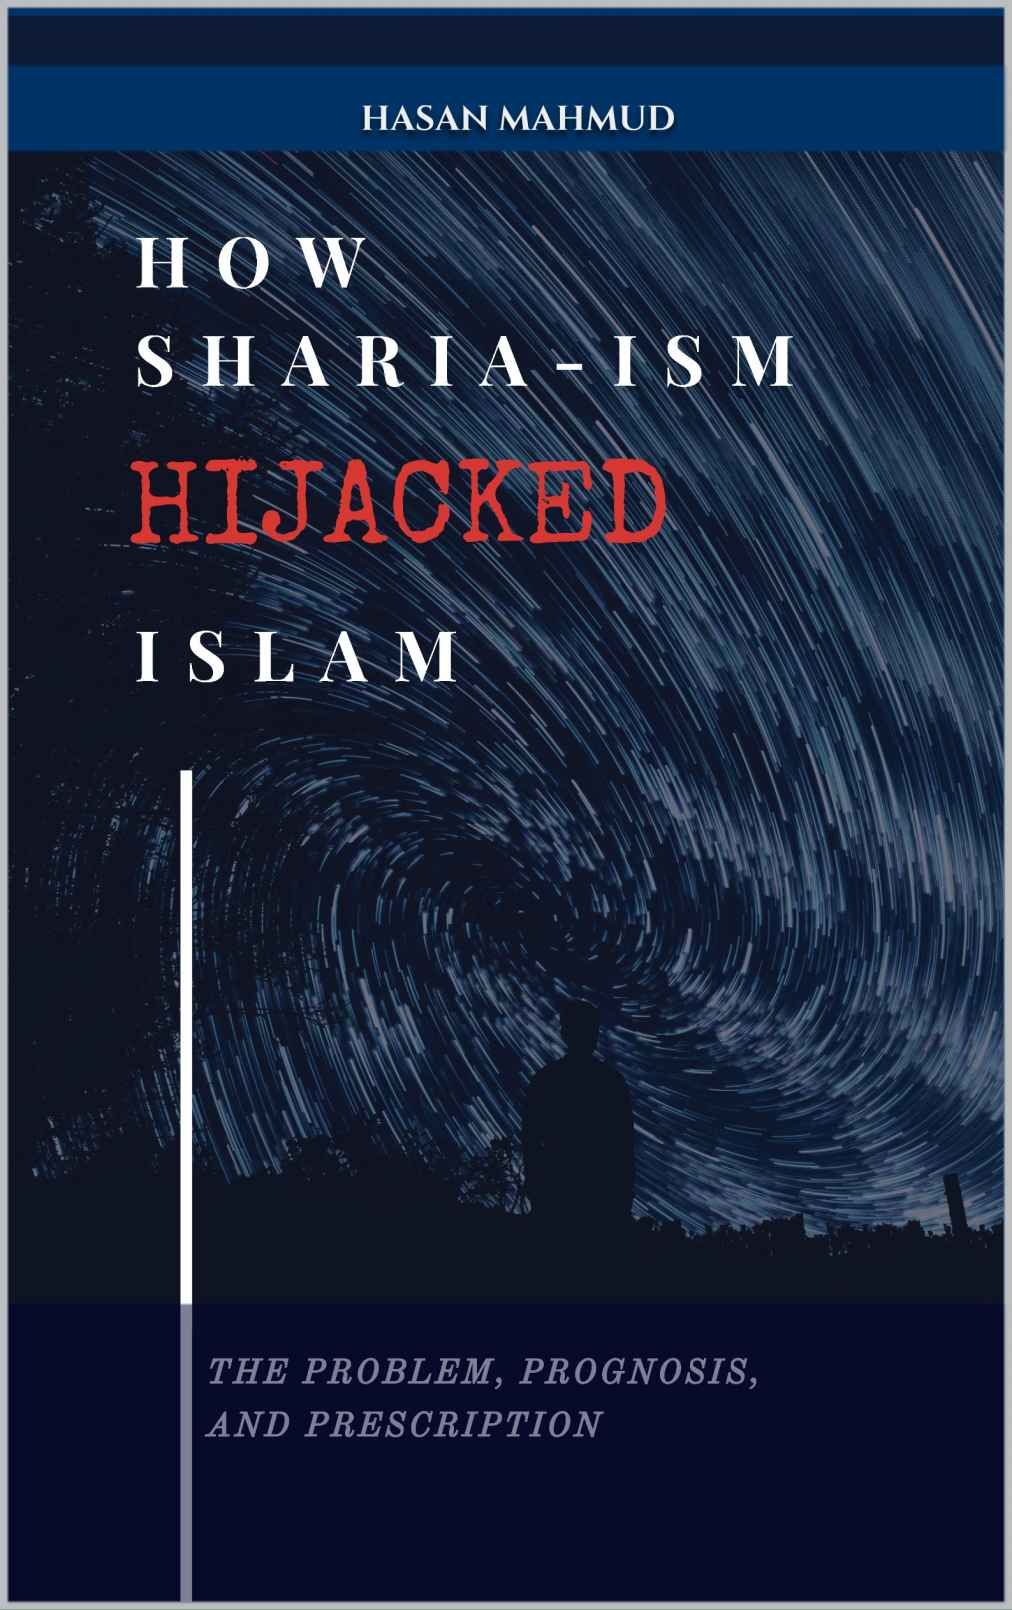 How Sharia-ism Hijacked Islam: The Problem, Prognosis, and Prescription